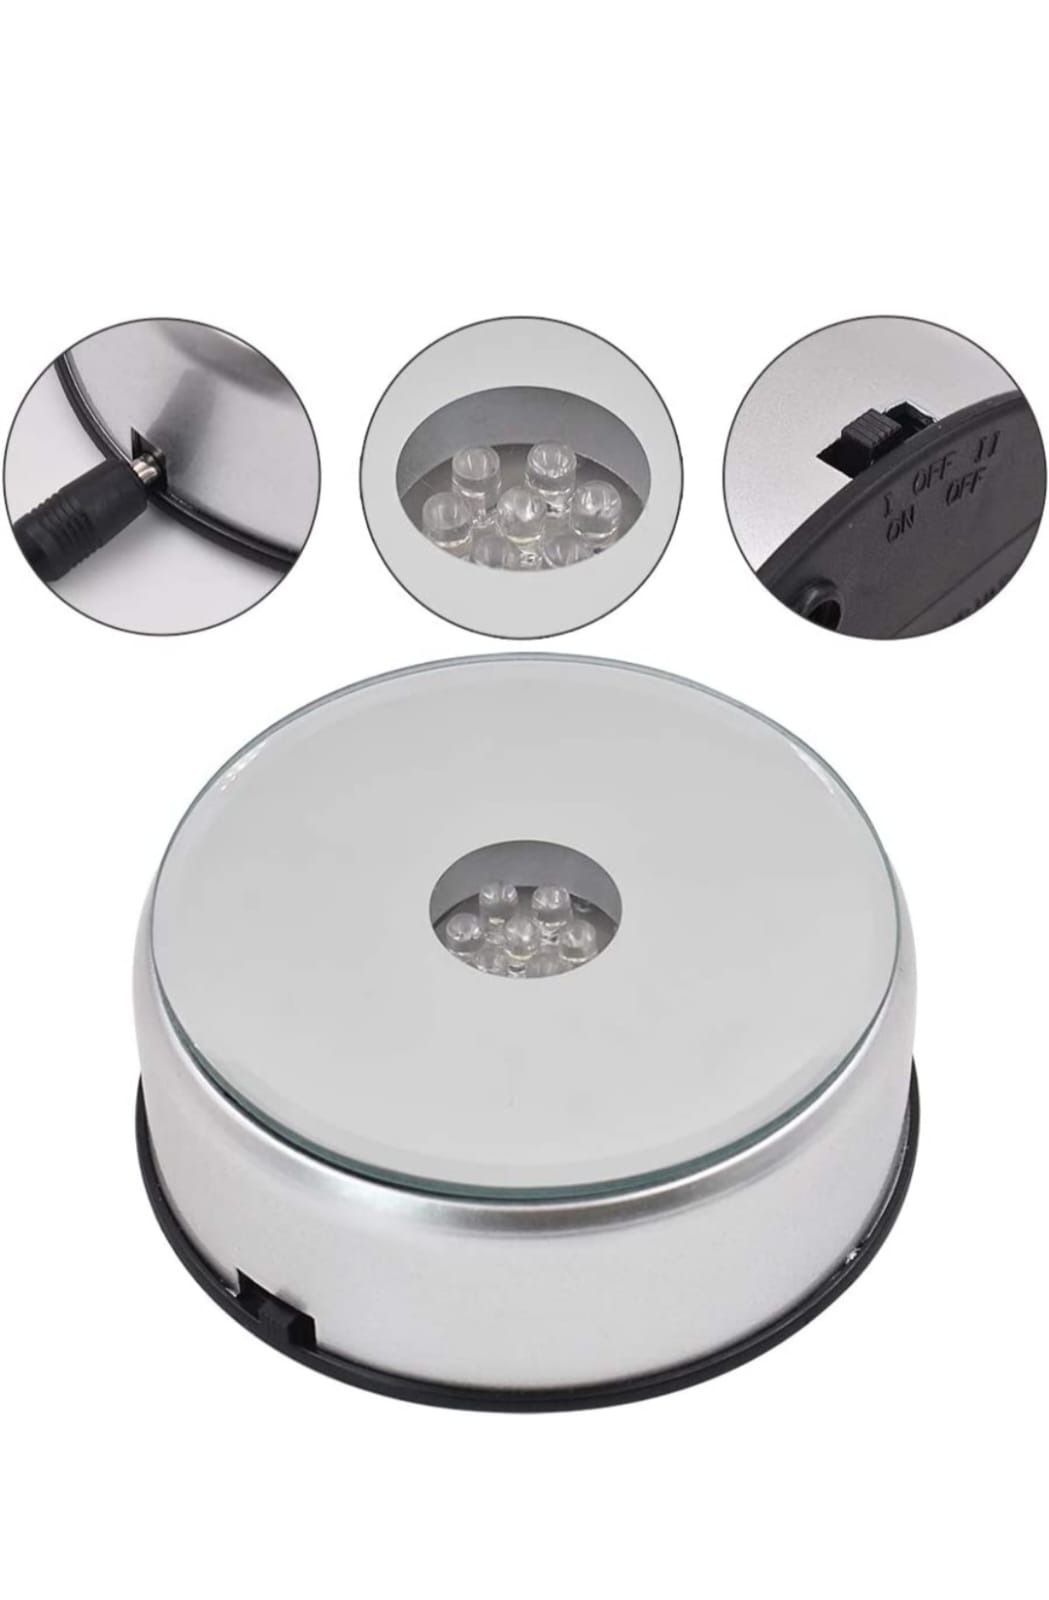 LED Rotating Base Light - Color Changing - Round Shape - 3.9 x 0.79 inches A&B Crystal Collection